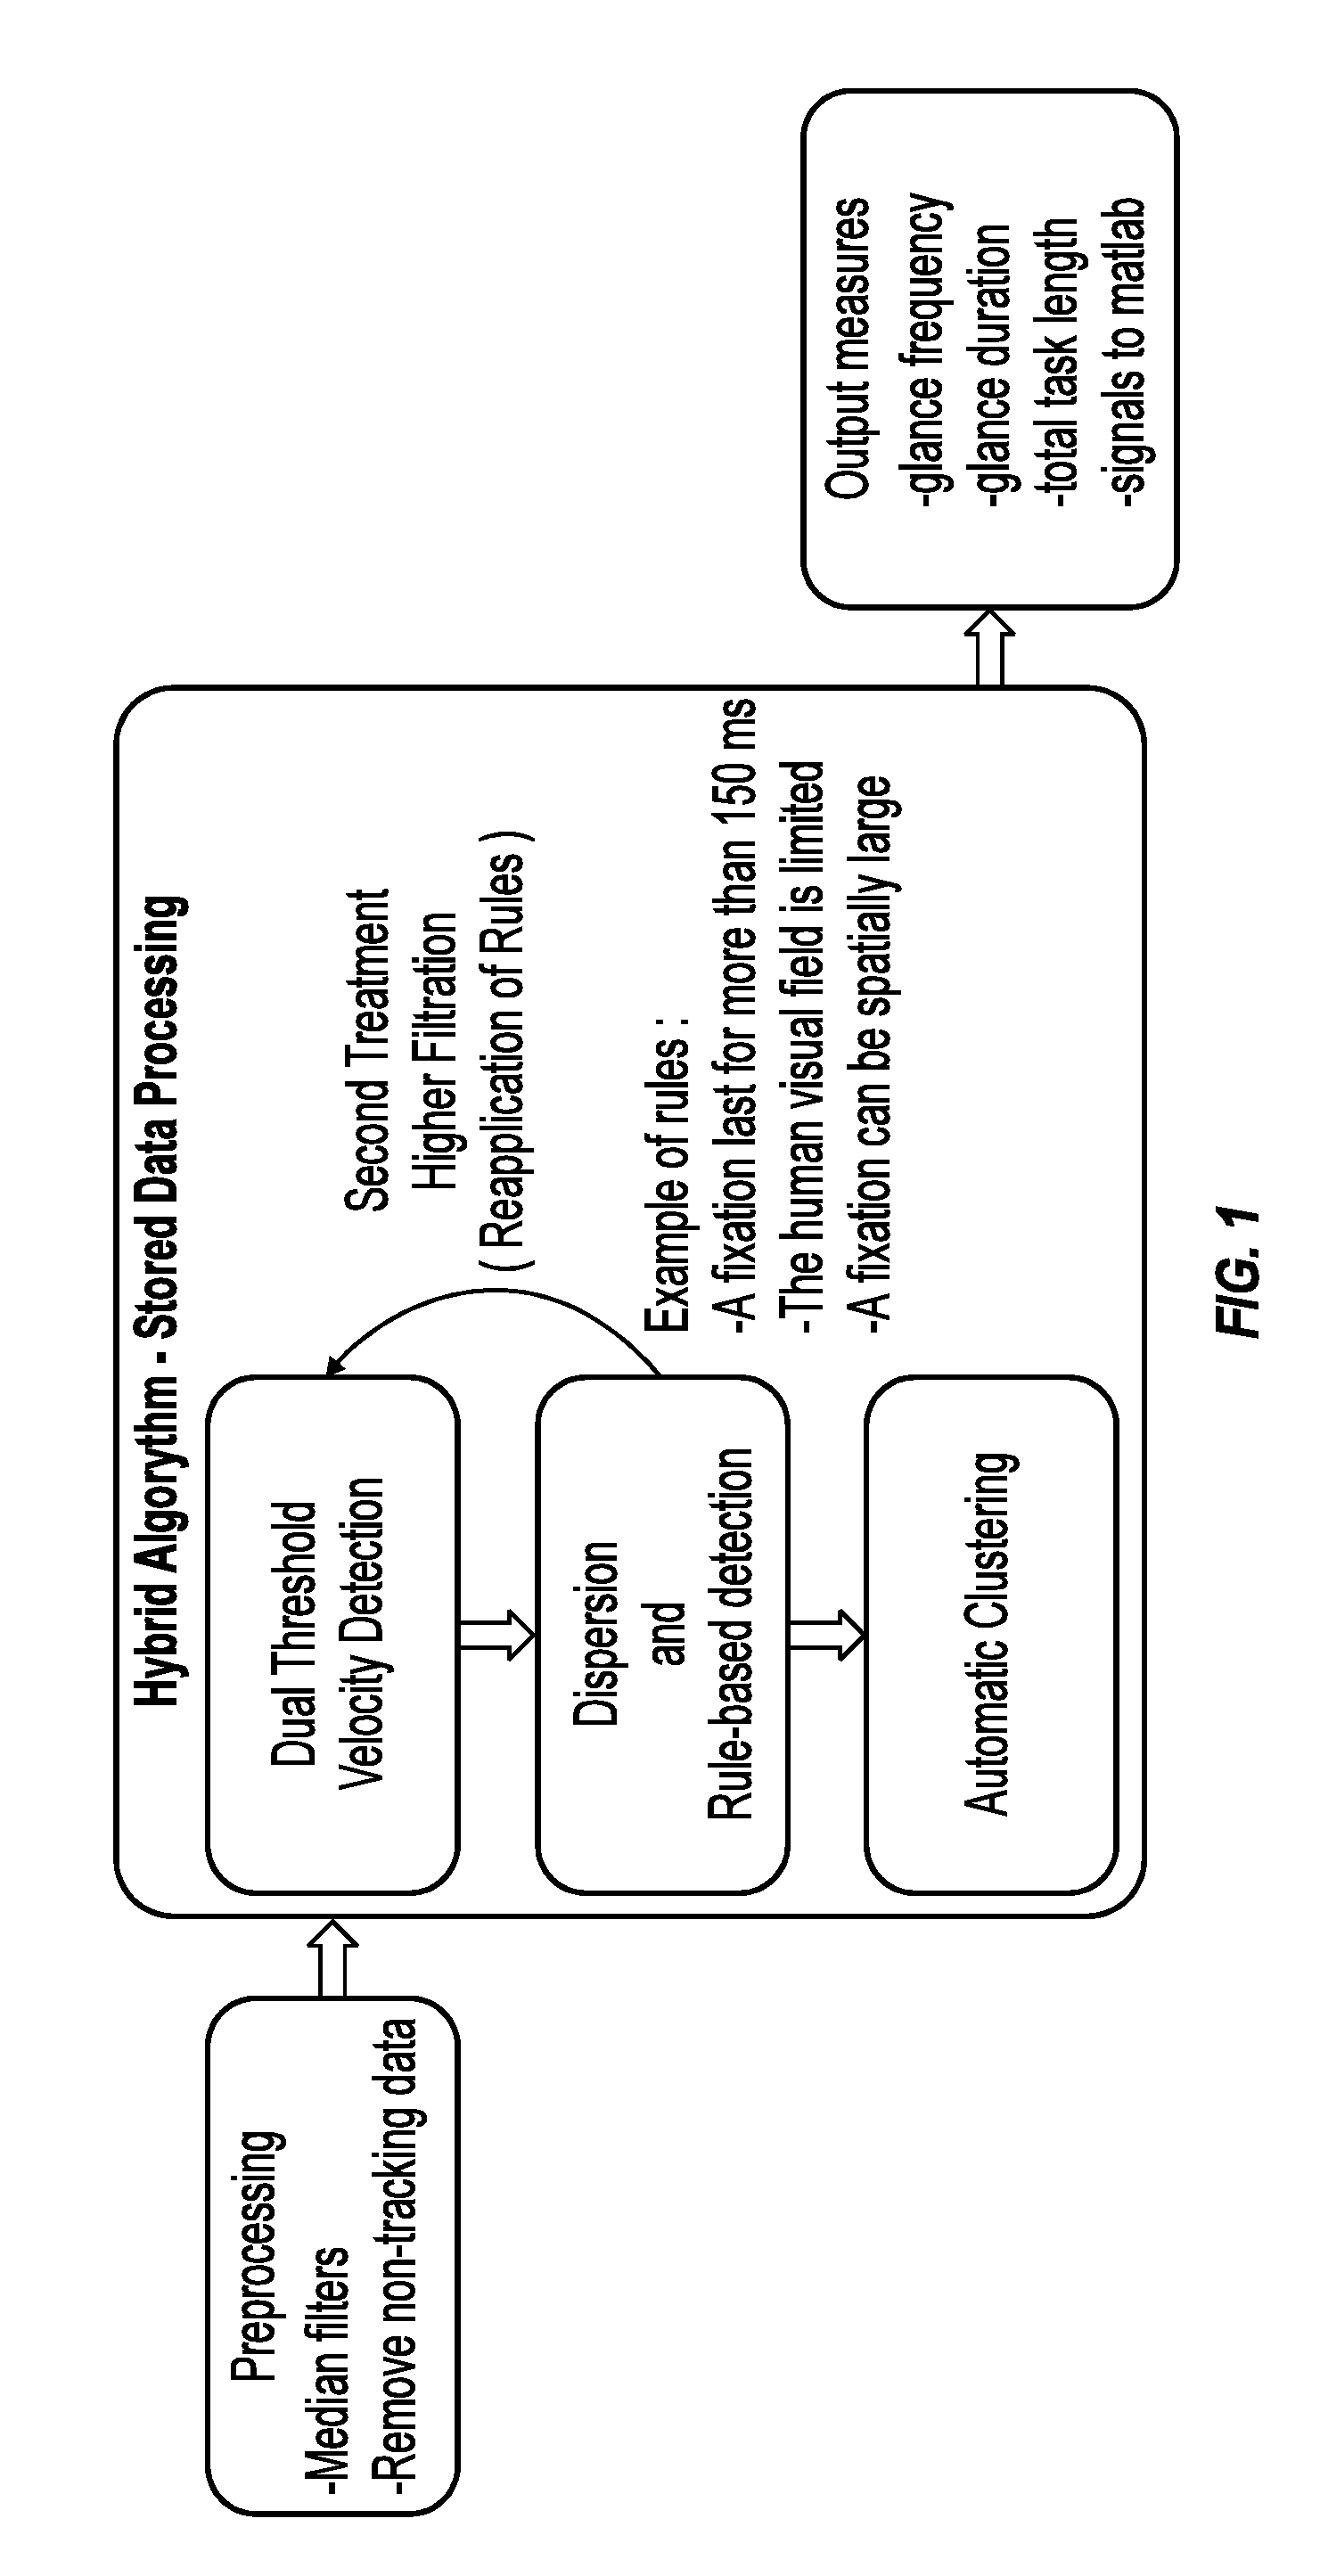 Method and arrangement for interpreting a subjects head and eye activity